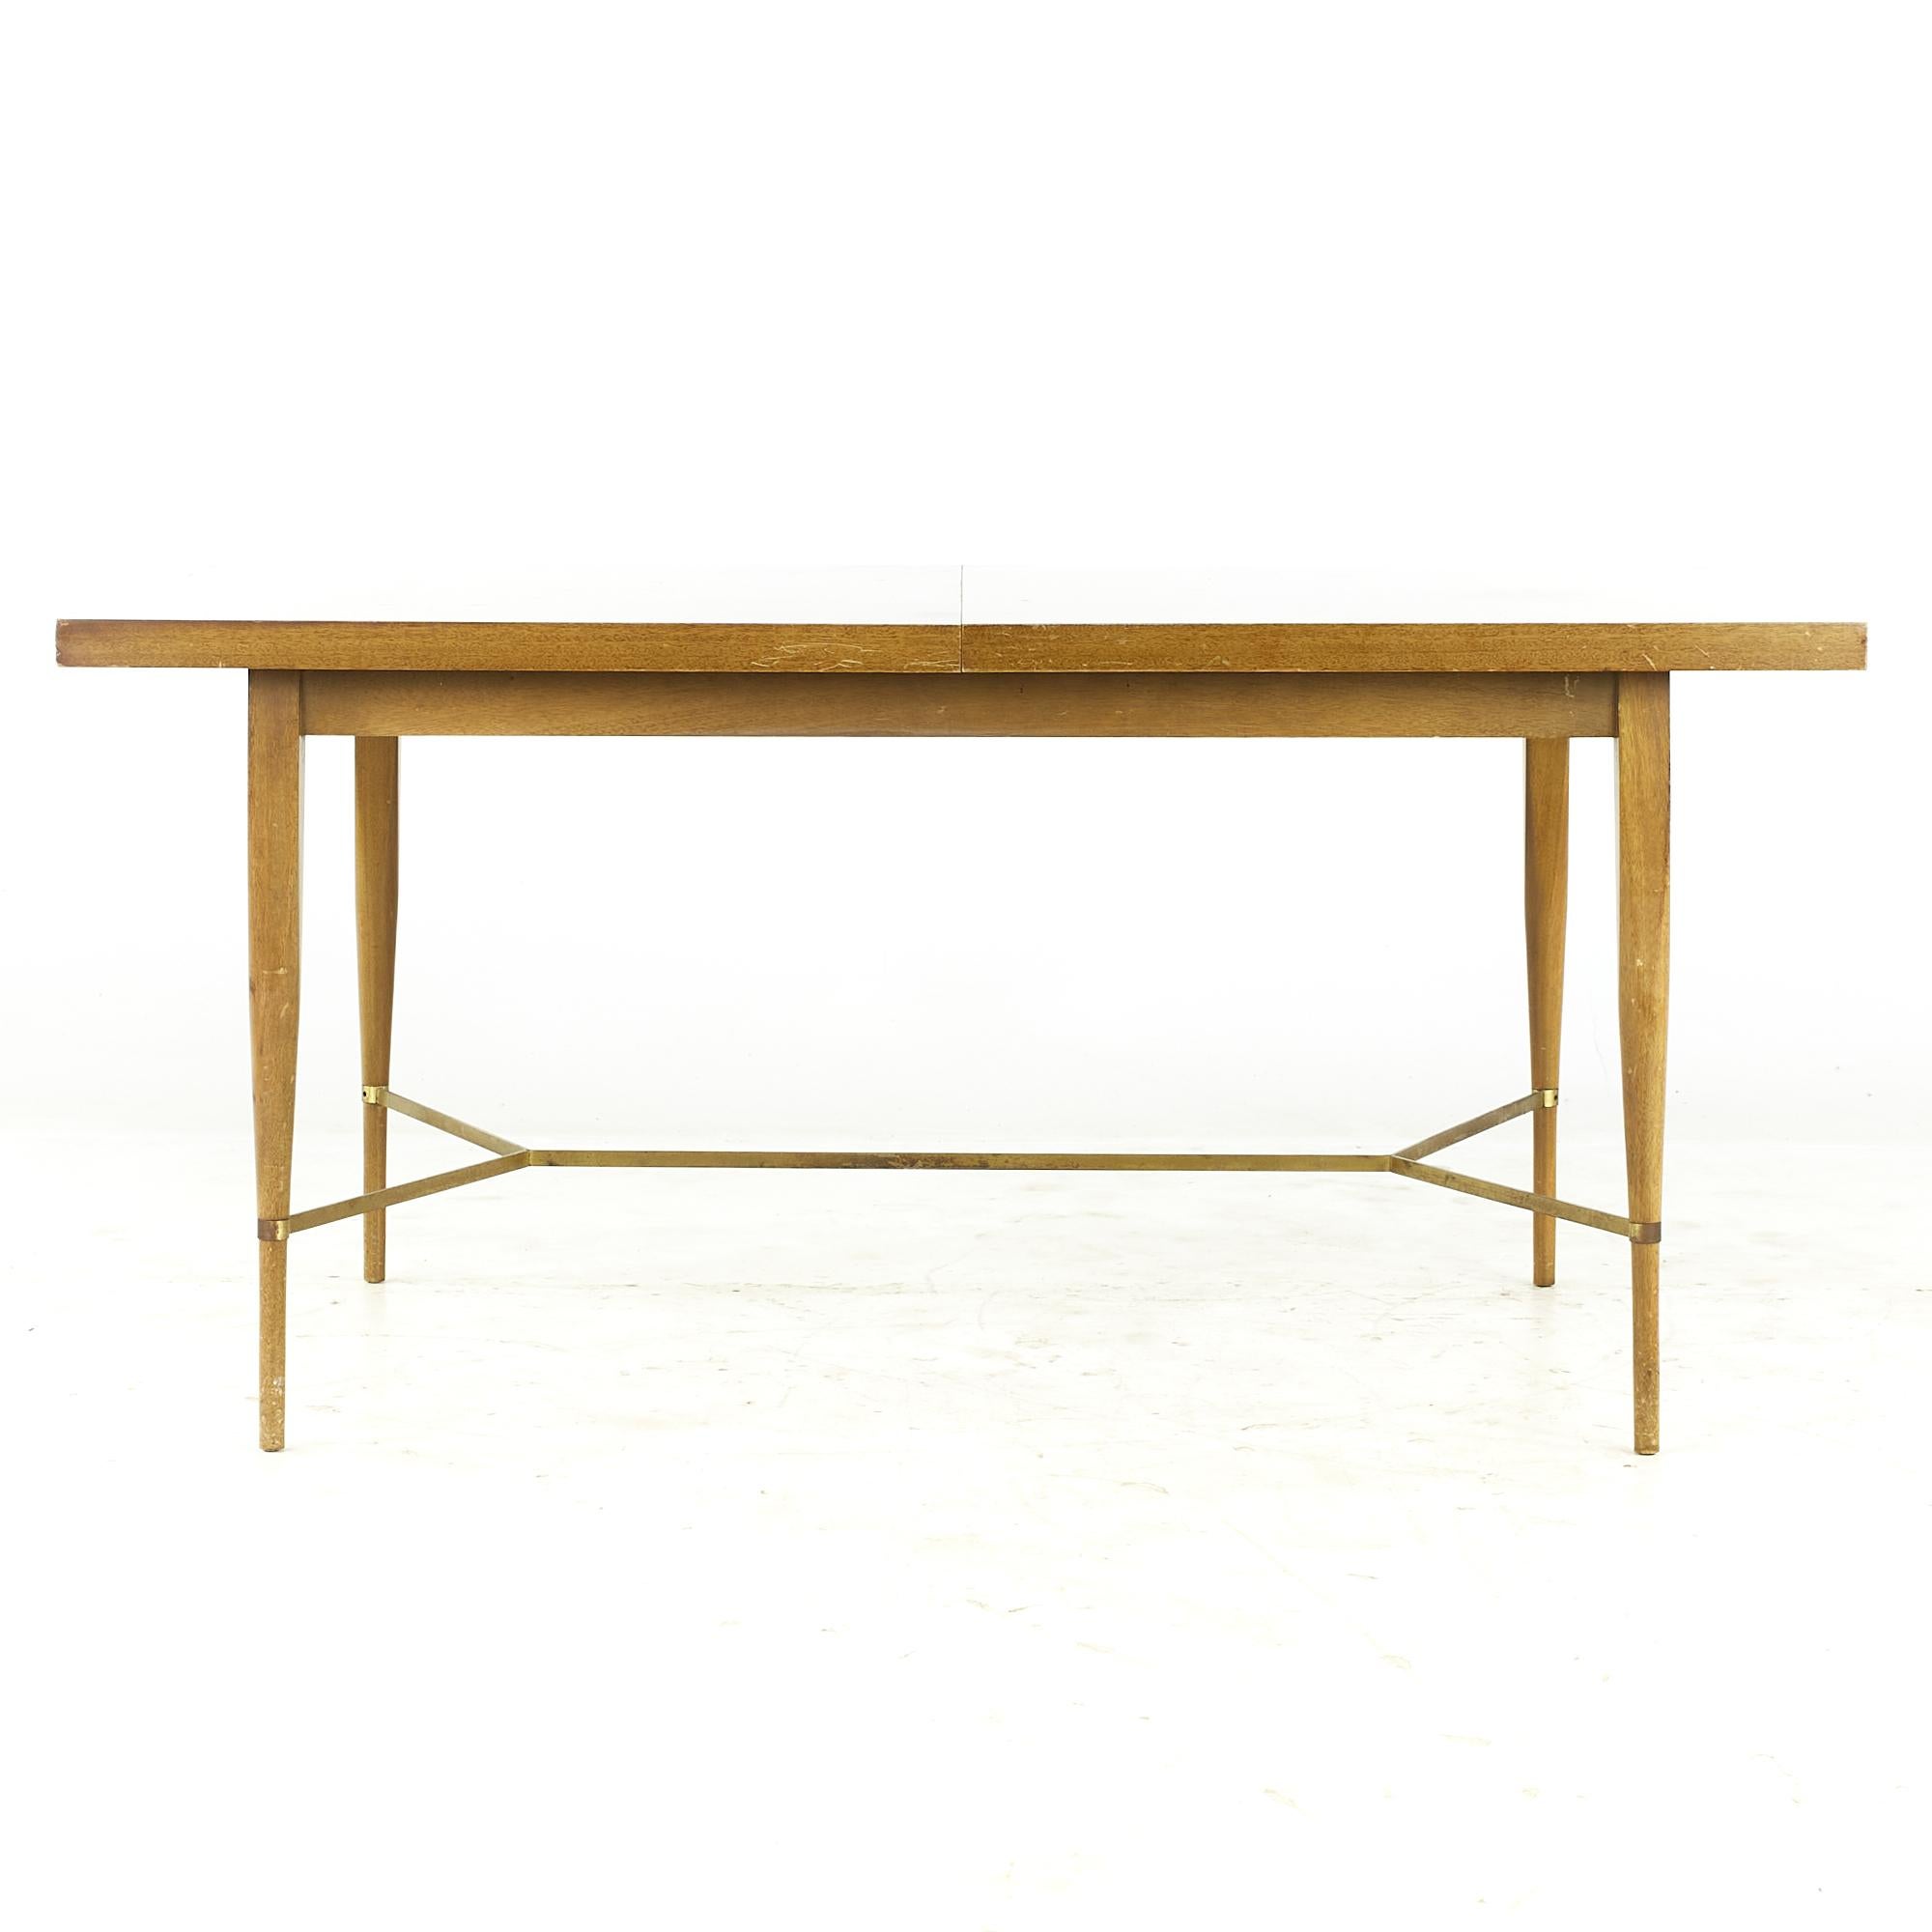 Paul McCobb for Calvin midcentury Brass and Mahogany Dining Table with Leaves

This table measures: 60 wide x 38 deep x 28.75 high, with a chair clearance of 24.5 inches, each leaf measures 12 inches wide, making a maximum table width of 84 inches